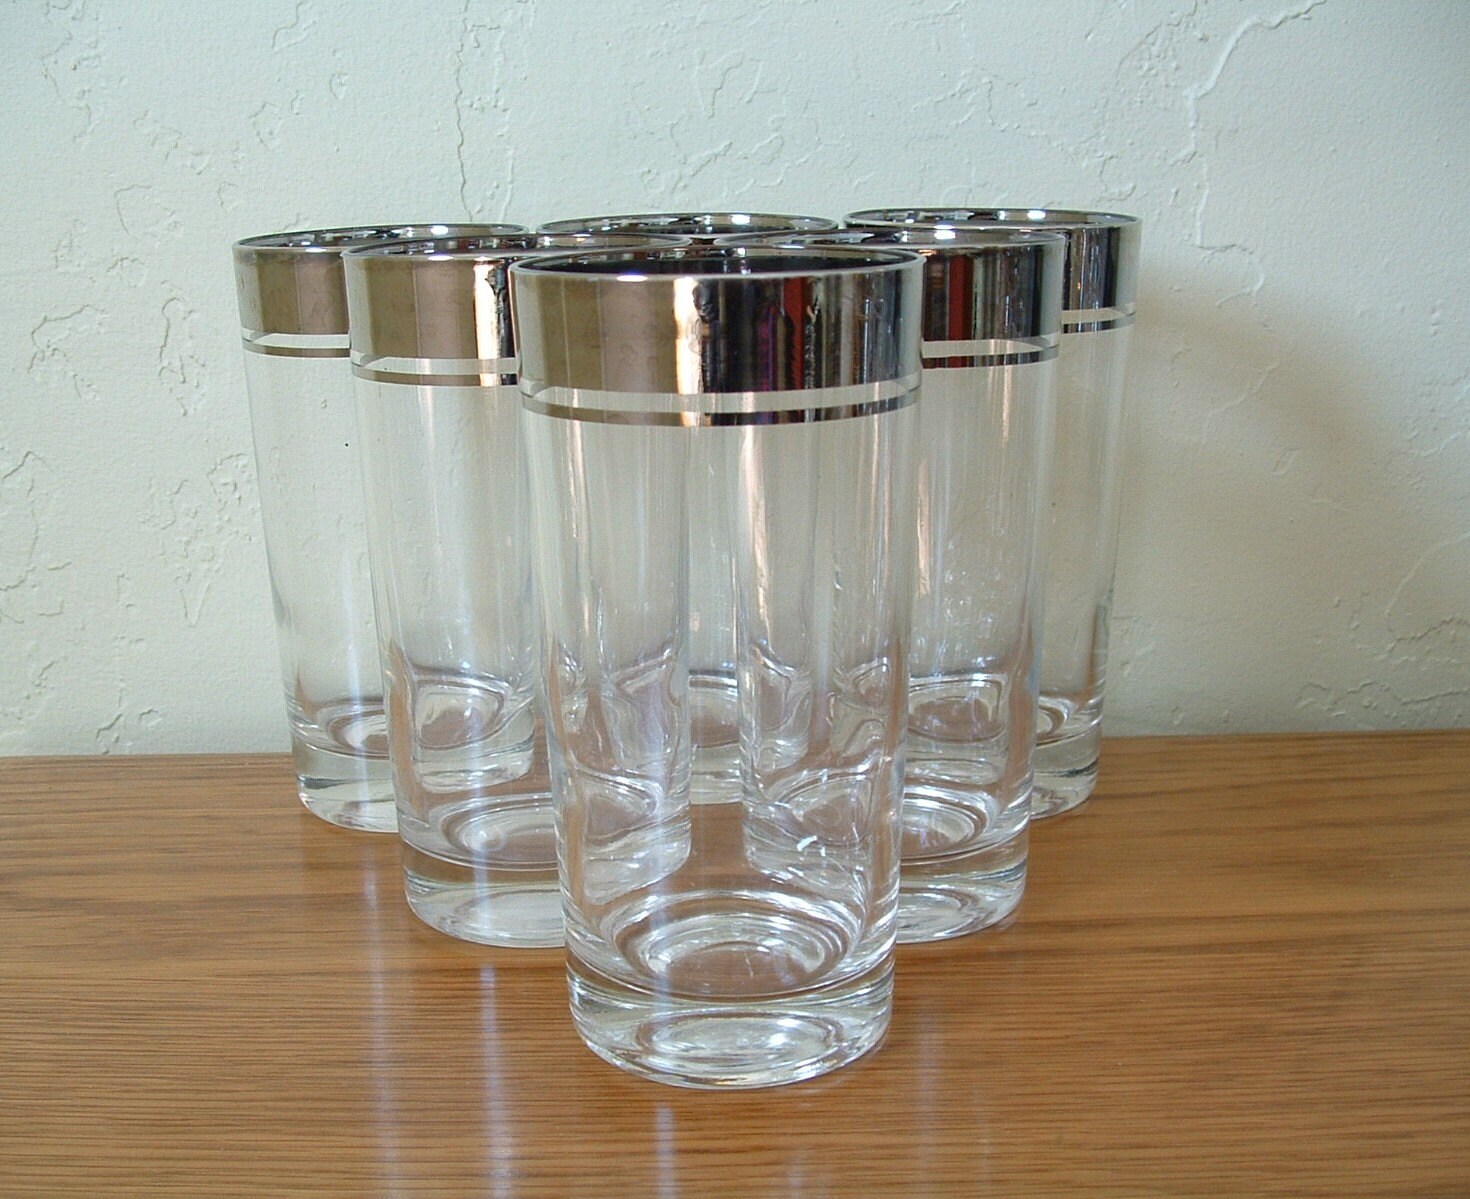 Vintage Silver Rim Silver Band Highball Glasses By Thefrabjousday